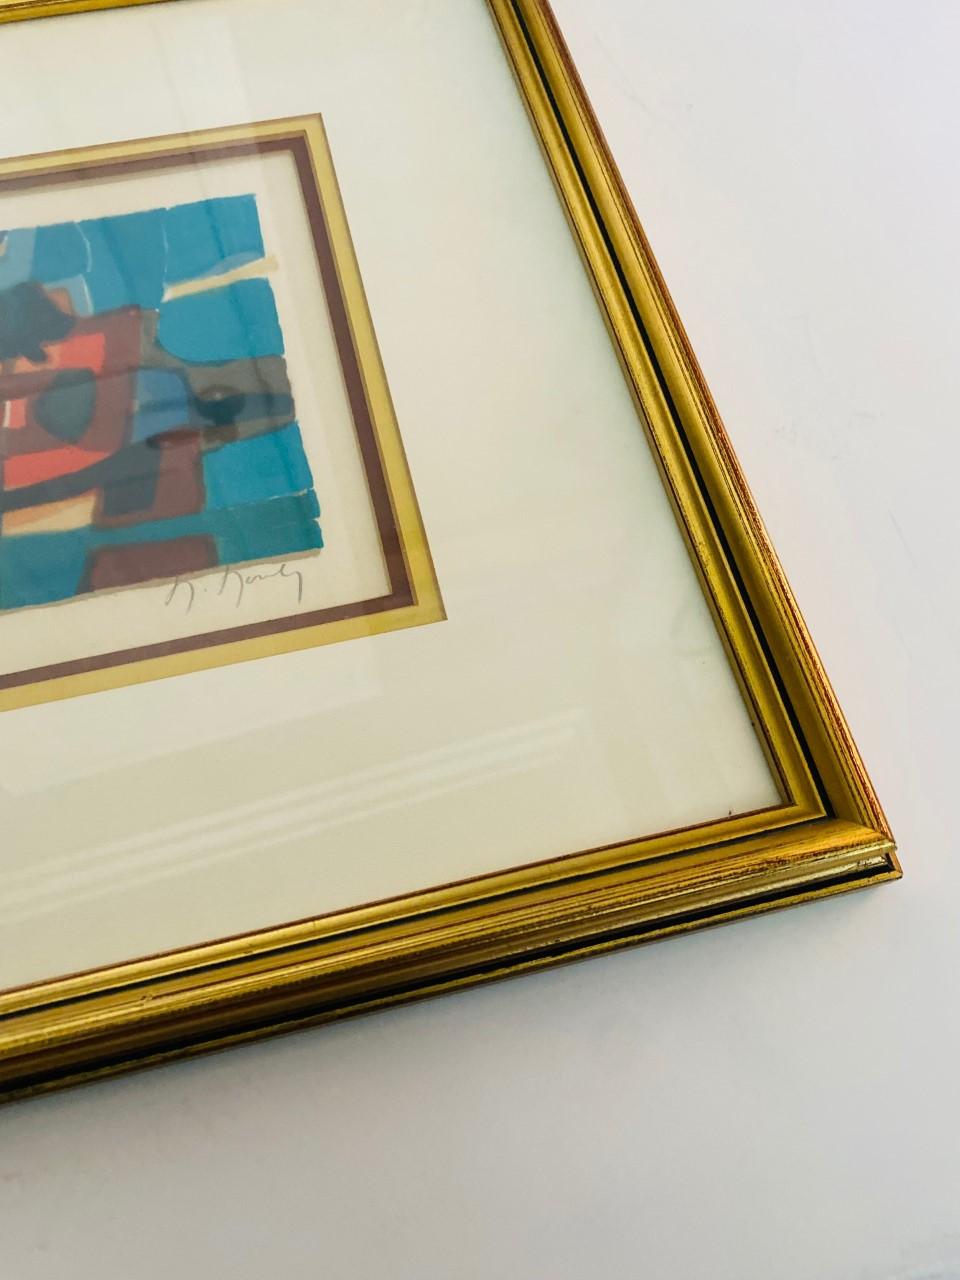 Incredible rendition by Marcel Mouly from 1976 adds beauty of color and modernist essense. This piece is beautifully framed and matted. Signed and numbered, this is a rare piece that exemplifies the work of this French artist.

Viewable Image: